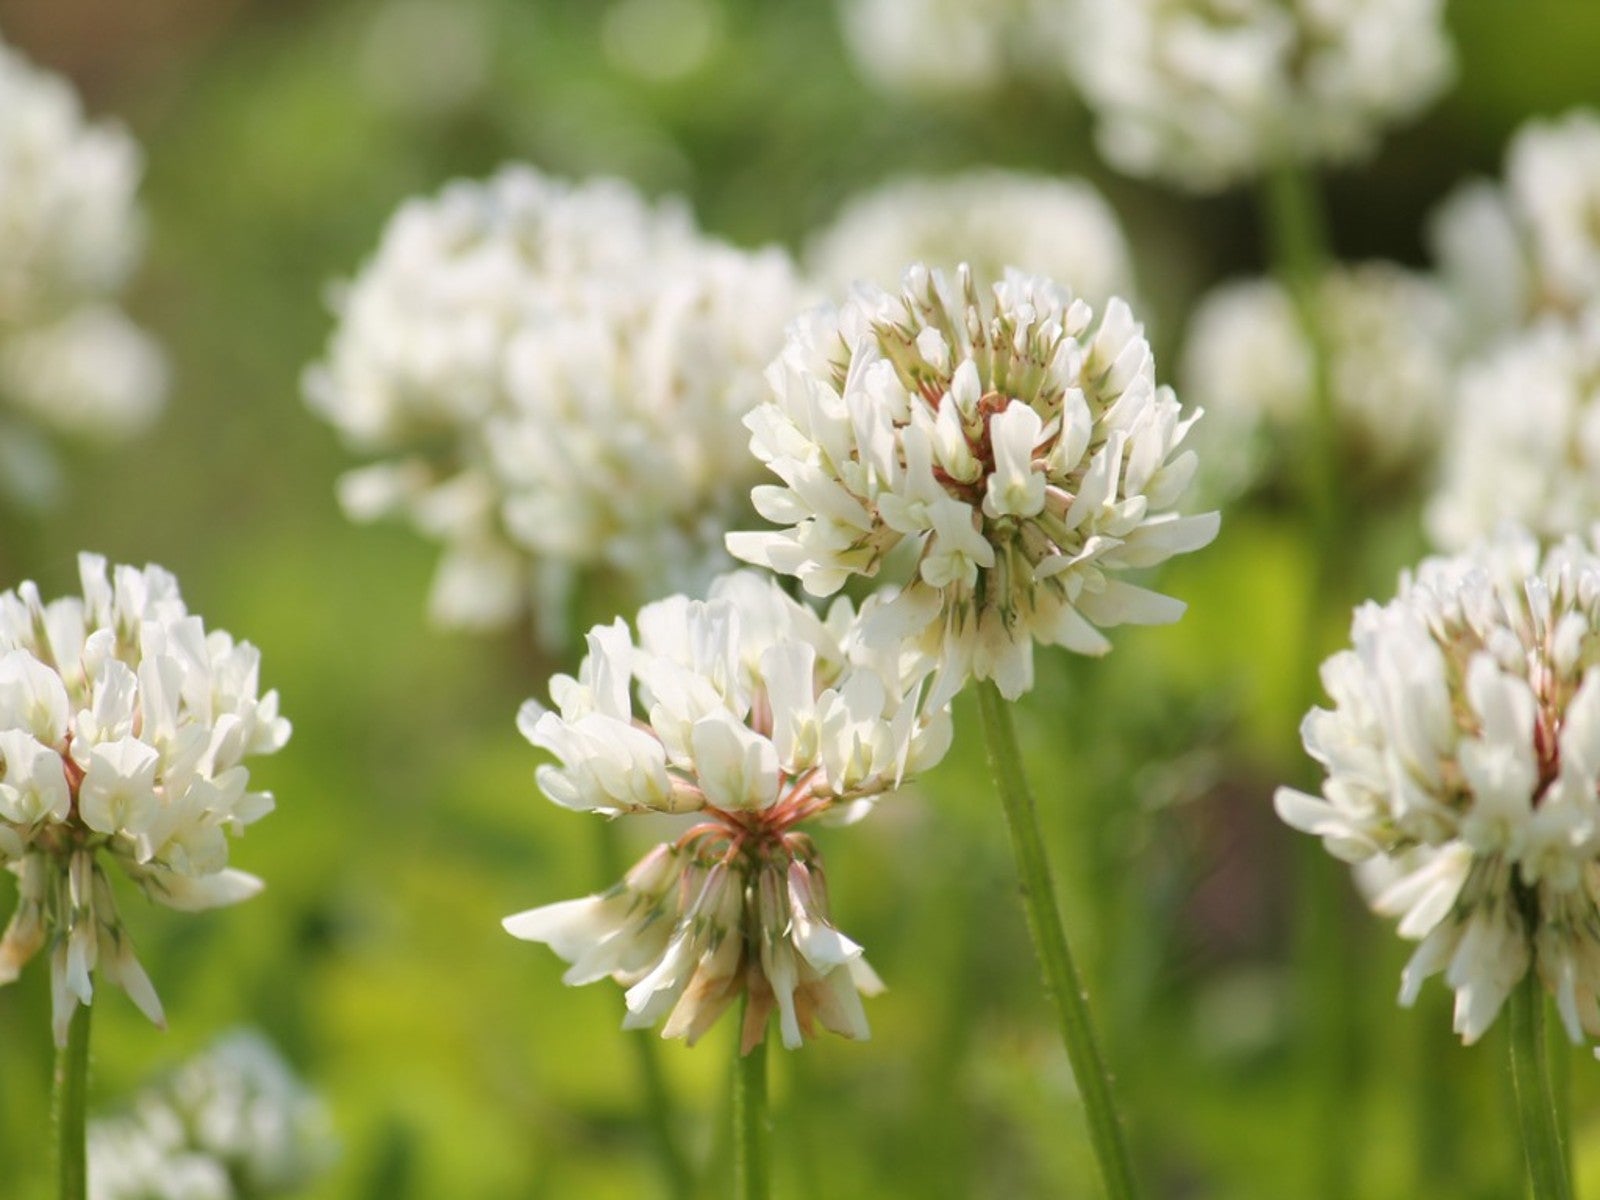 8 Common Plants With Little White Flowers in Grass